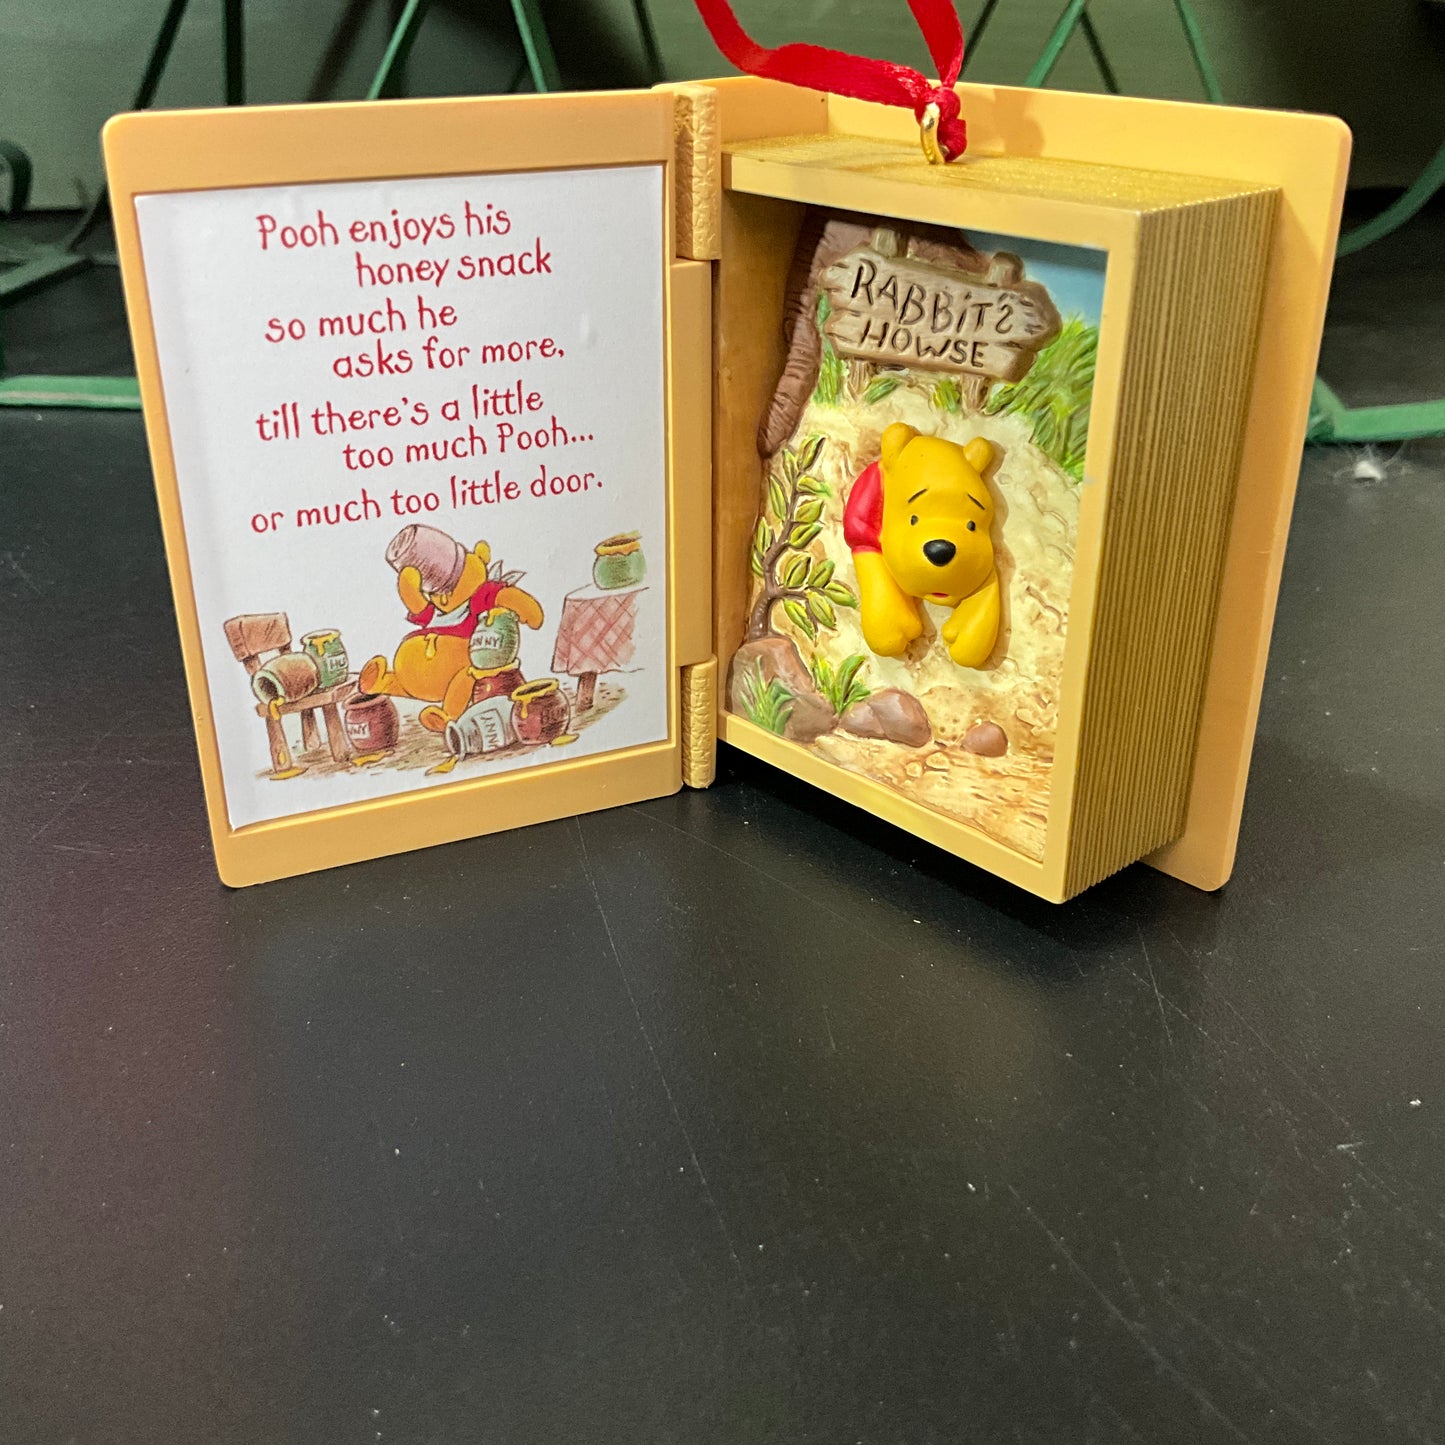 Hallmark choice Winnie the Pooh  Keepsake ornaments see pictures and variations*